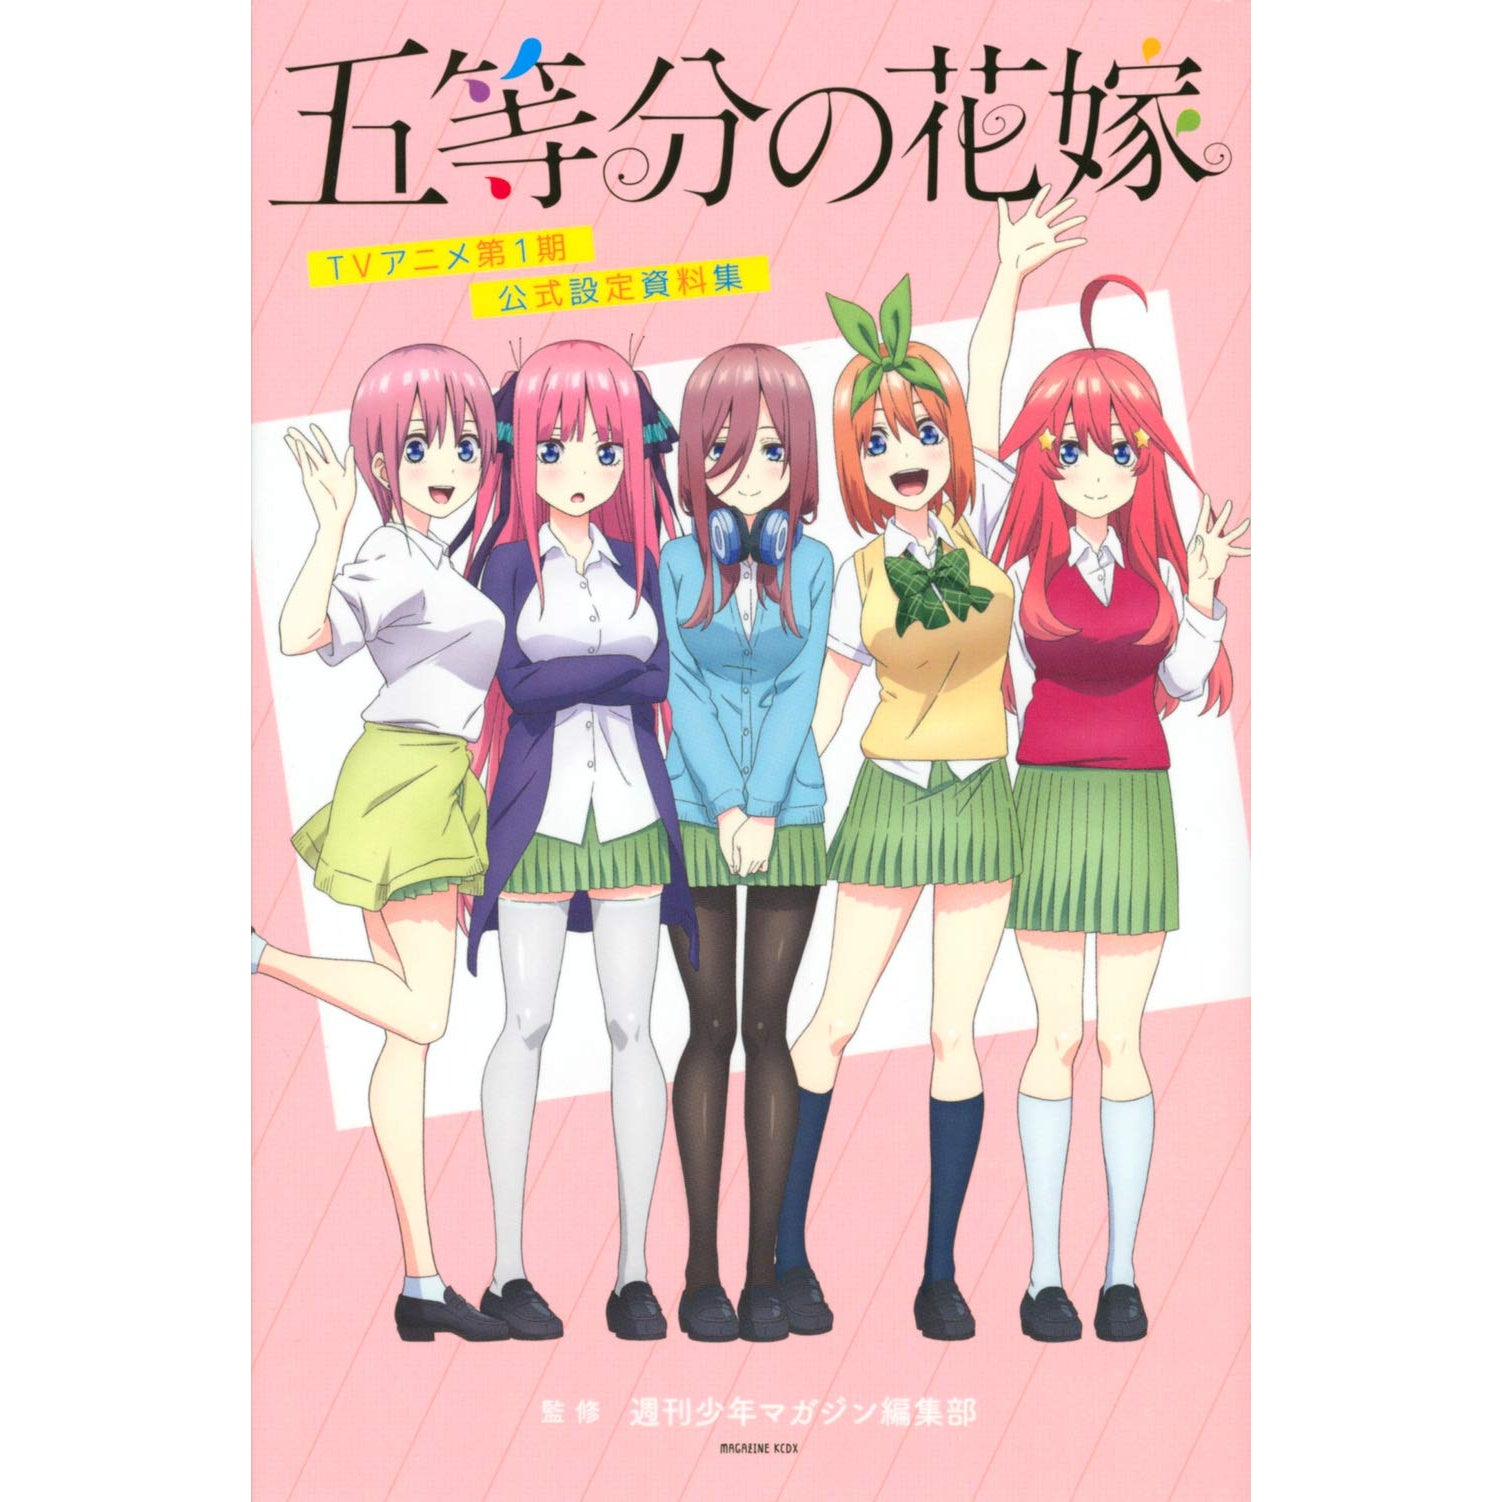 Be Smitten by The Quintessential Quintuplets All Over Again in Side-Story  Anime Creditless Opening - Crunchyroll News